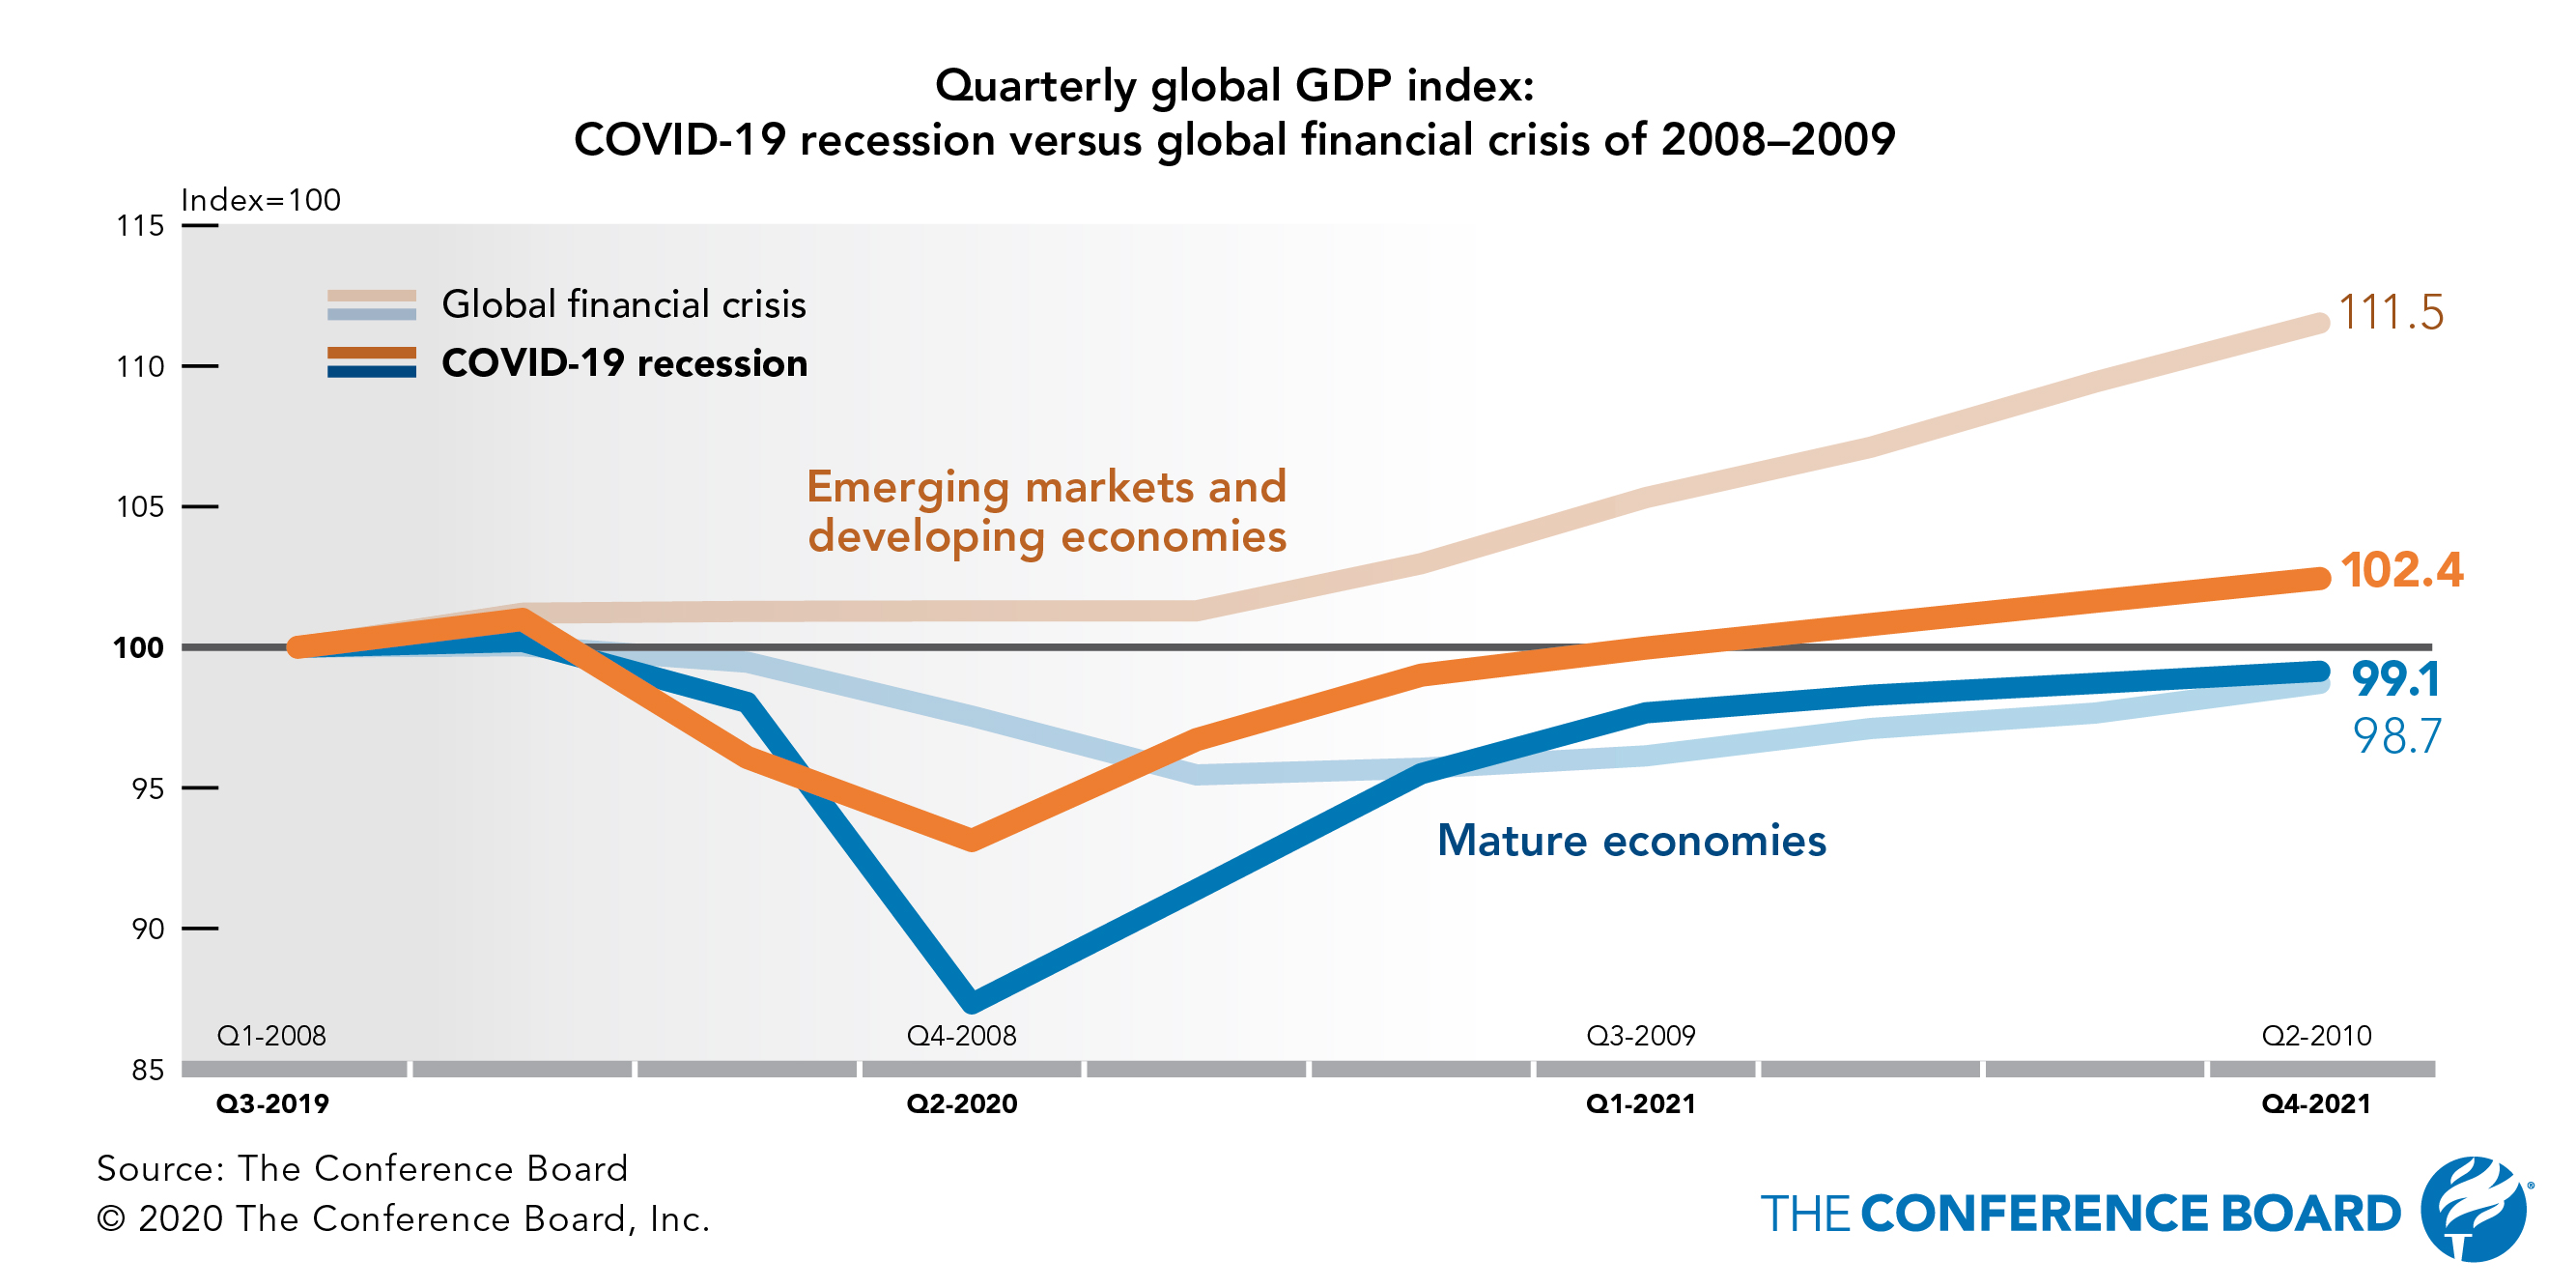 COVID-19 recession shows different recovery path than global financial crisis